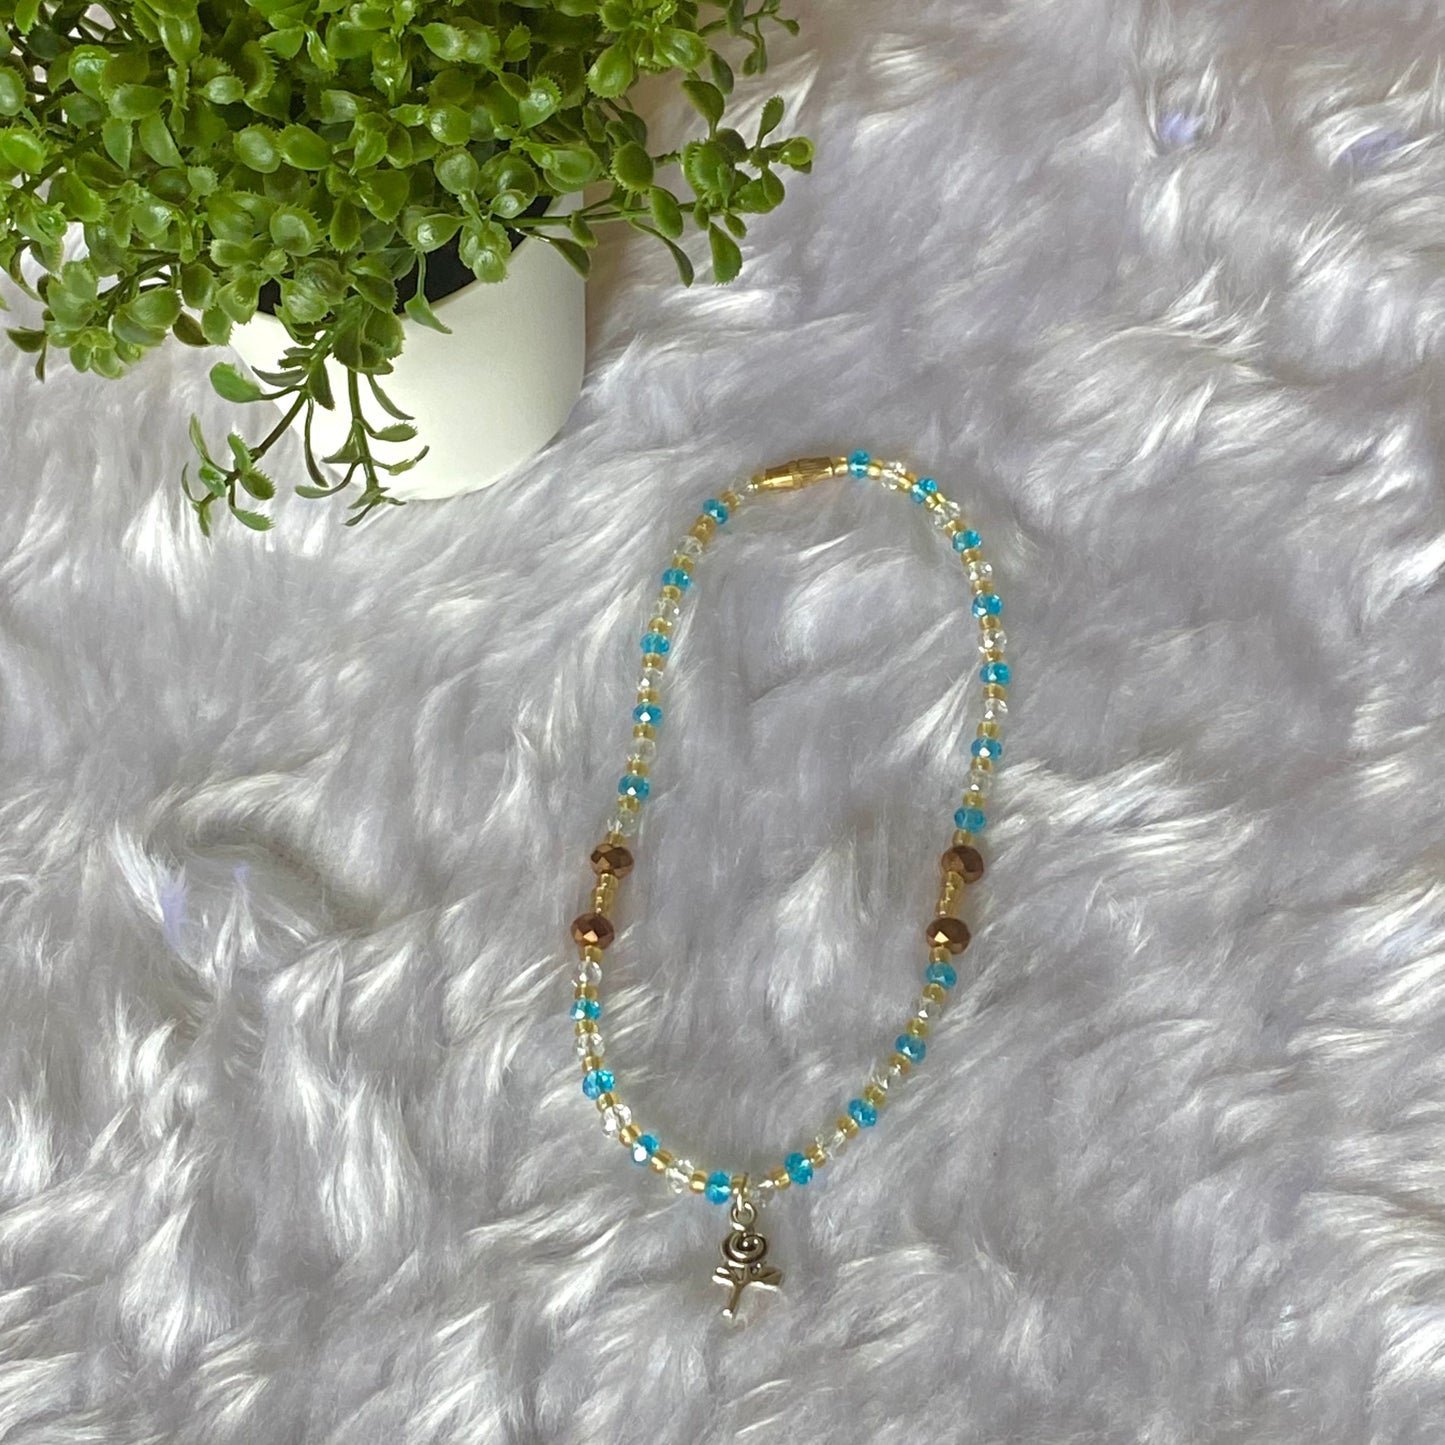 Dupe Sea Blue Crystal Belly Chain Waist Beads